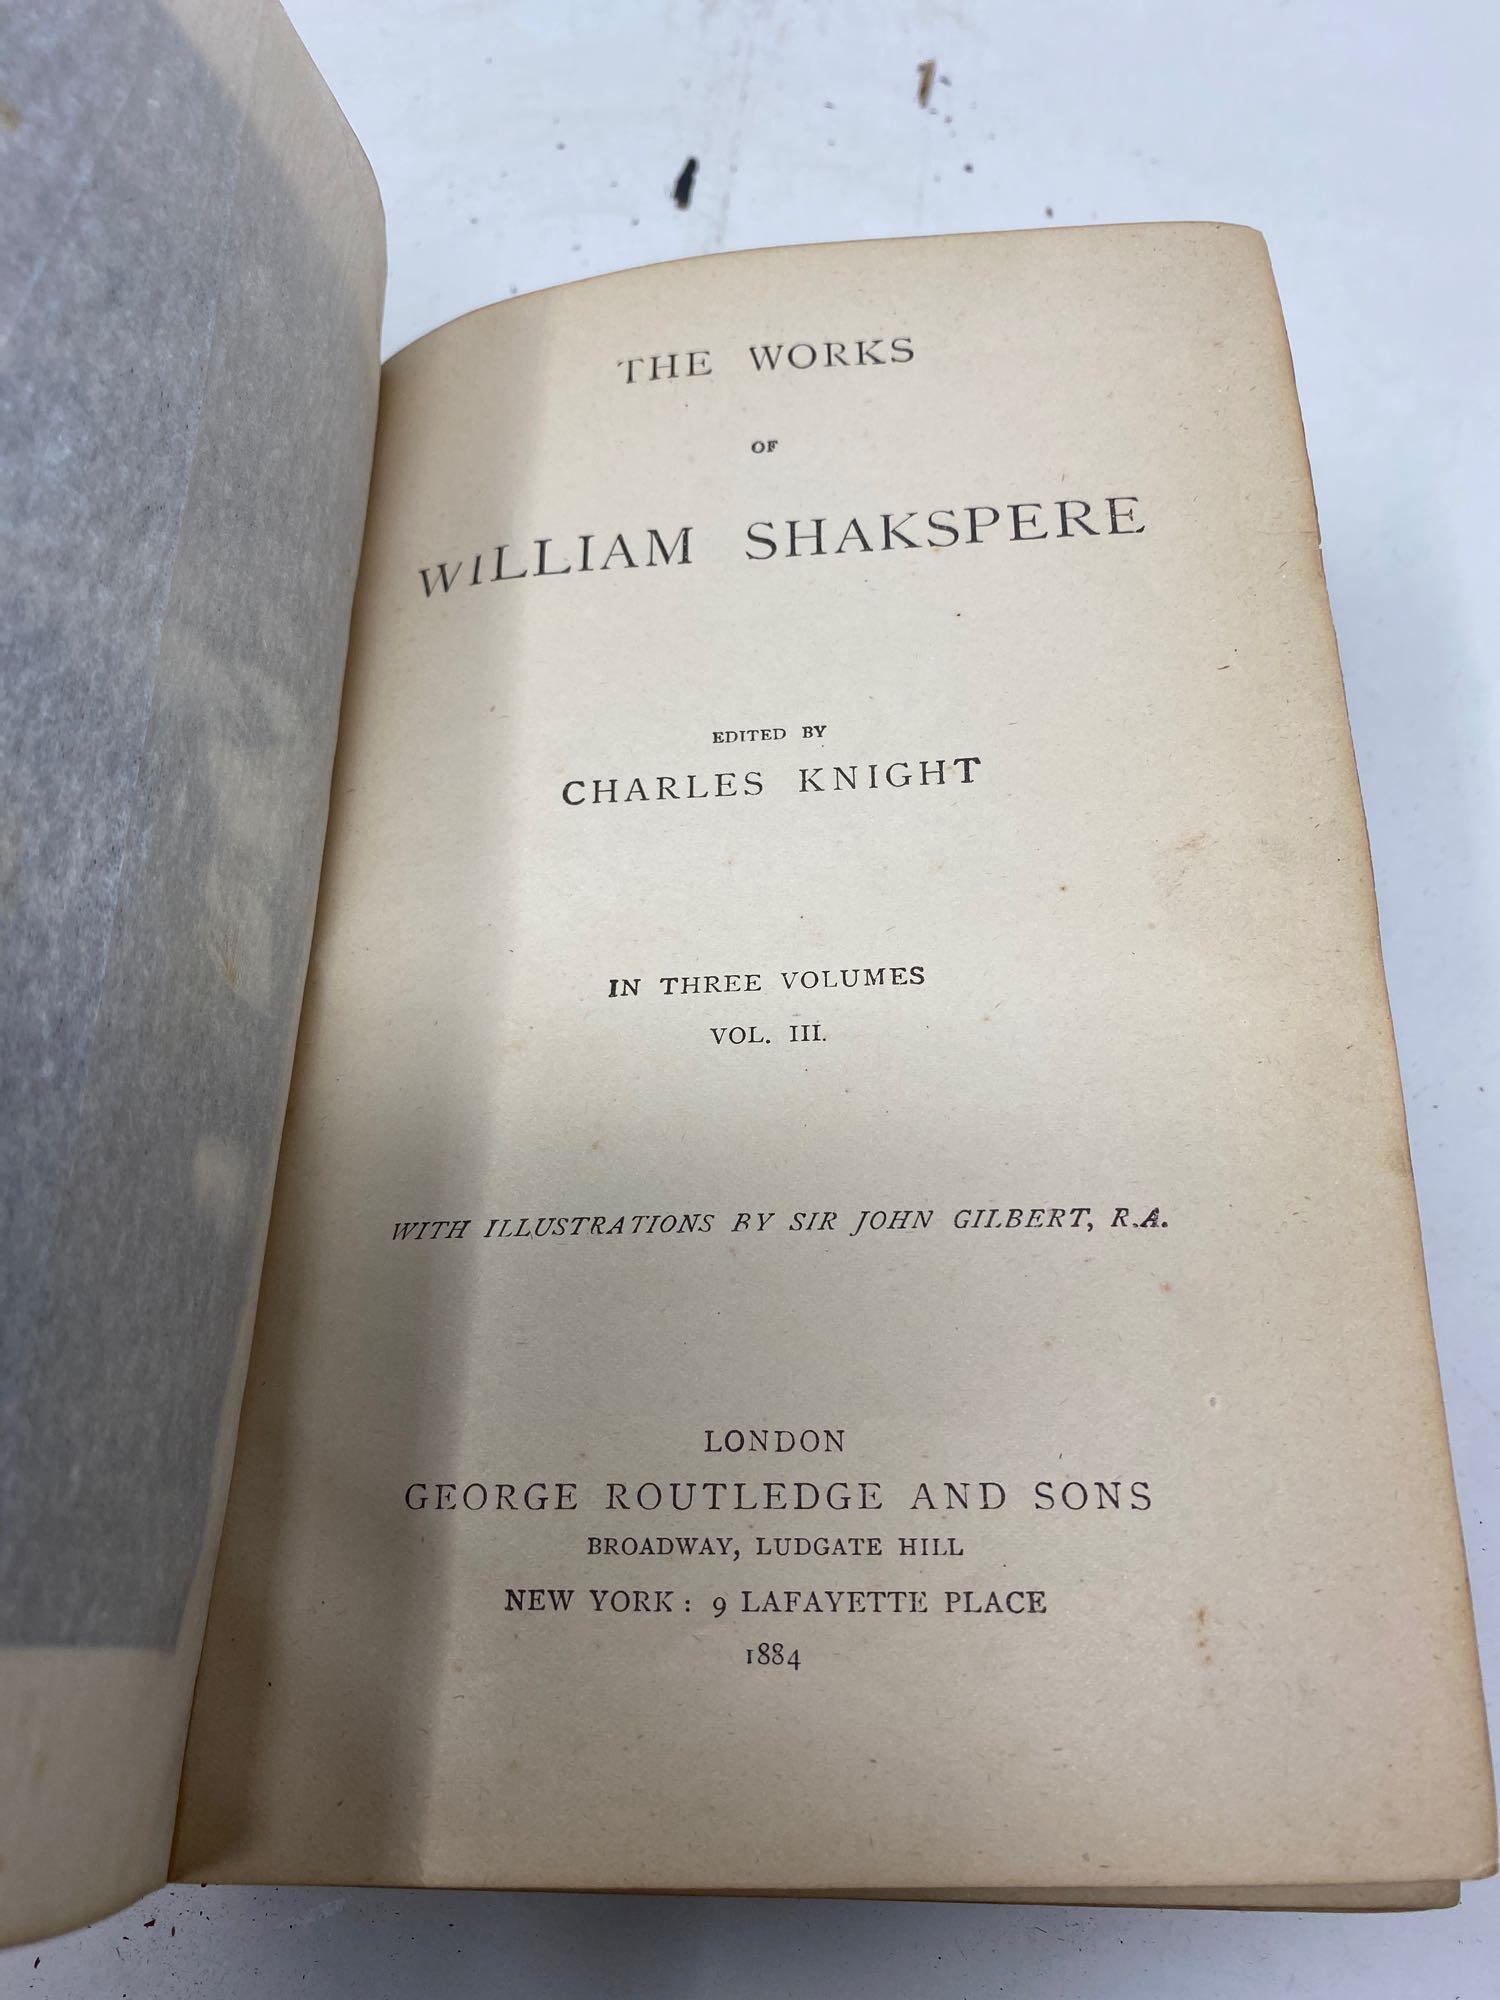 Antique, Historically Collectible Shakespeare Books